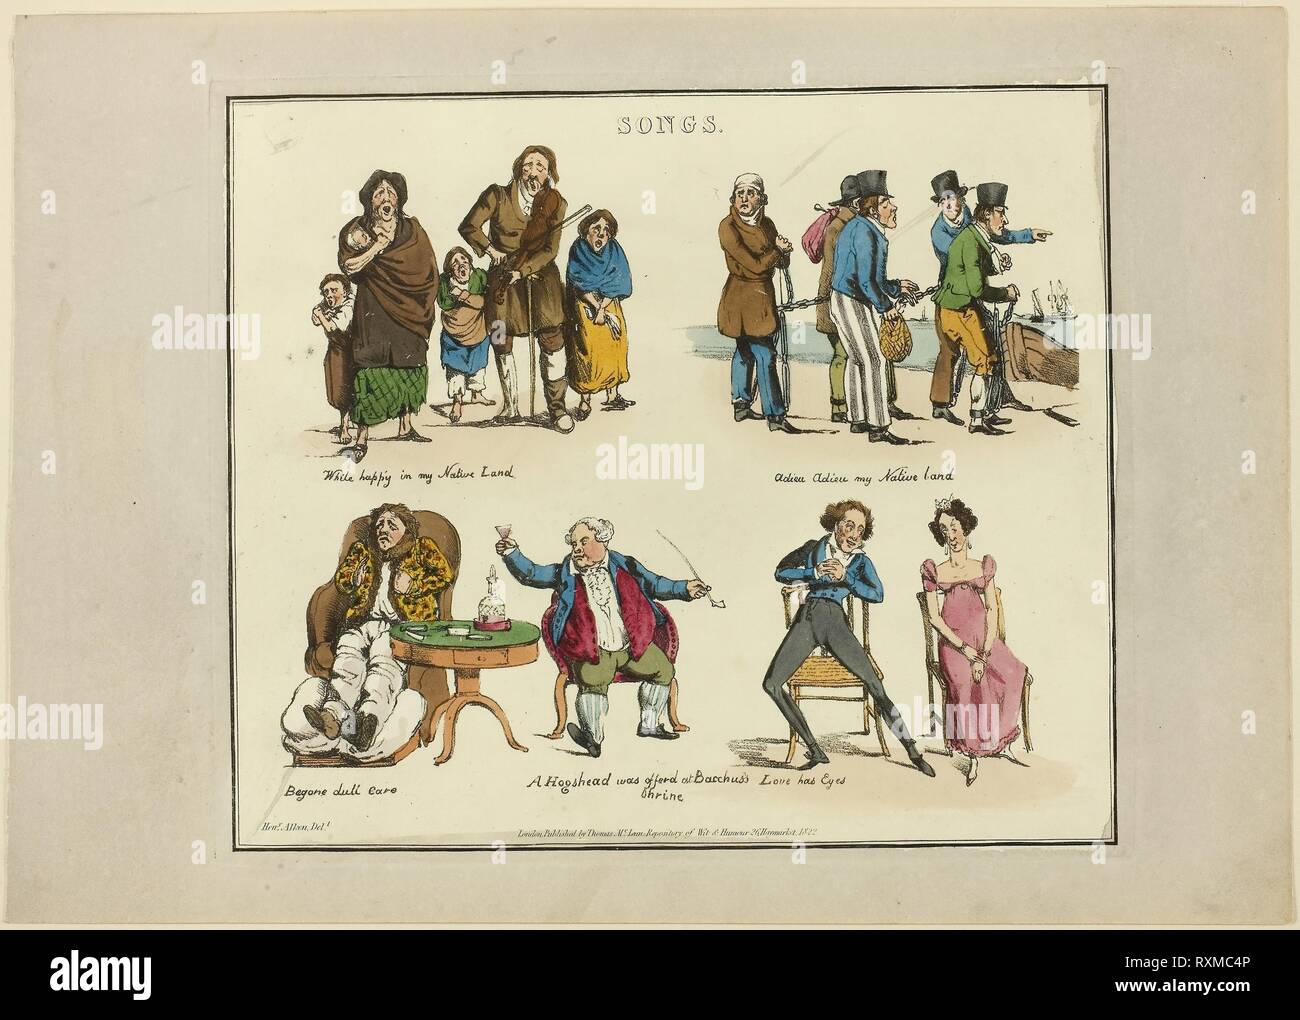 Plate from Illustrations to Popular Songs. Henry Alken (English, 1785-1851); published by Thomas McLean (English, active 1790-1860). Date: 1822. Dimensions: 200 × 237 mm (image); 212 × 245 mm (plate); 245 × 343 mm (sheet). Soft ground etching with hand-coloring and aquatint on paper. Origin: England. Museum: The Chicago Art Institute. Stock Photo